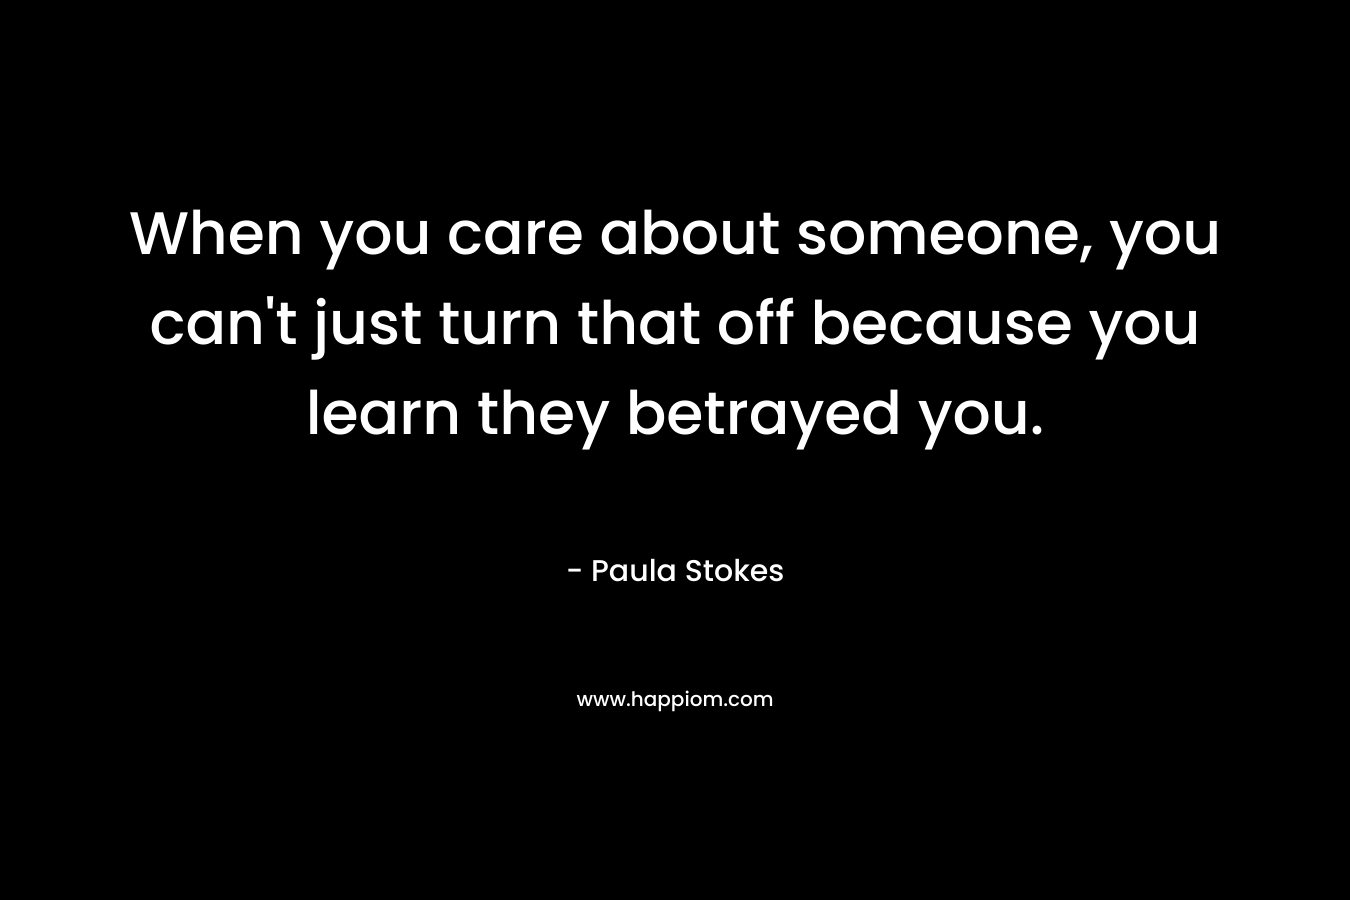 When you care about someone, you can’t just turn that off because you learn they betrayed you. – Paula Stokes